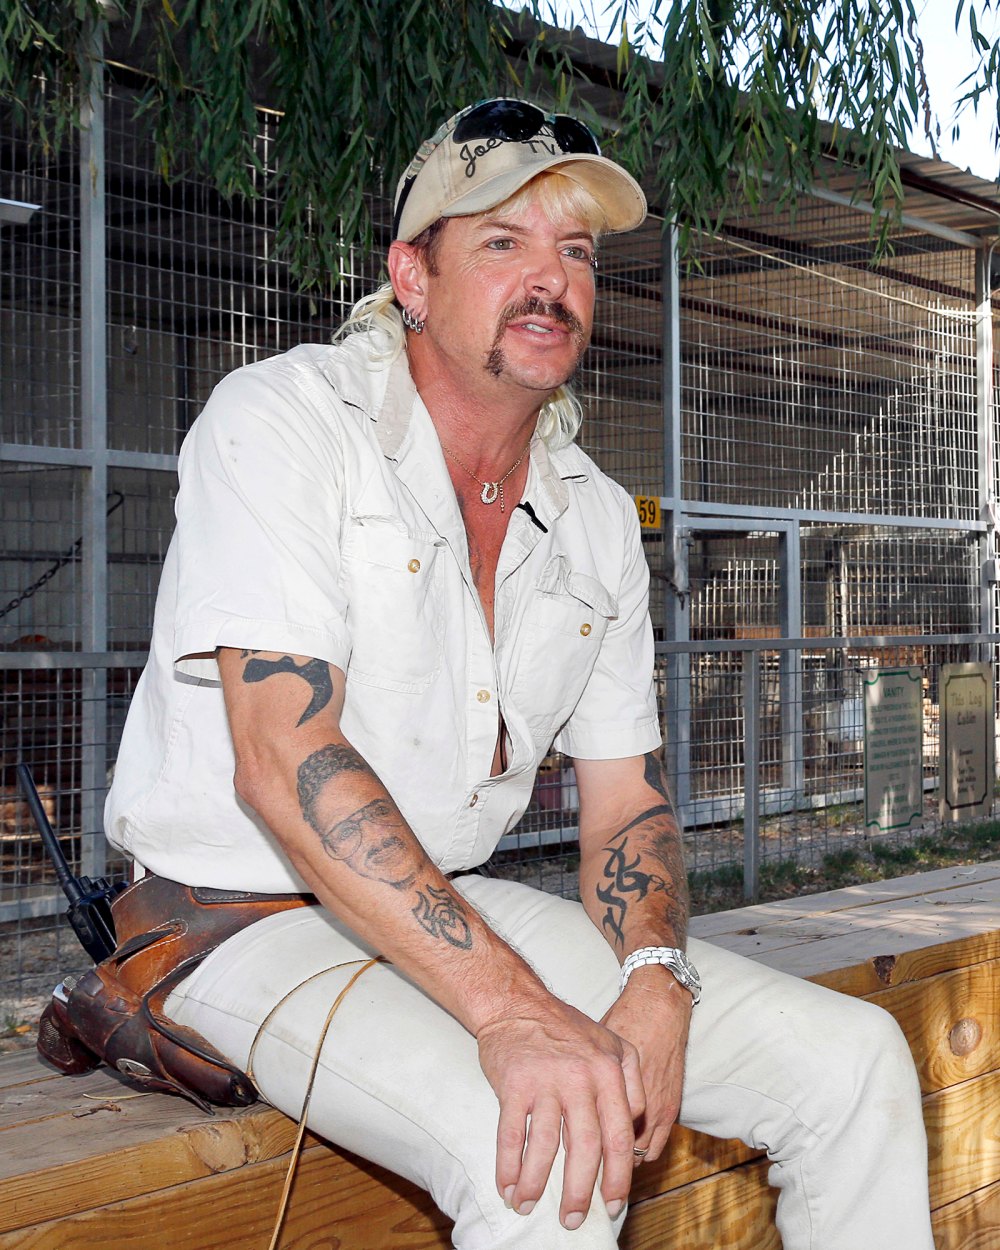 Tiger King’s Joe Exotic Resentenced to 21 Years in Prison After Murder-for-Hire Conviction